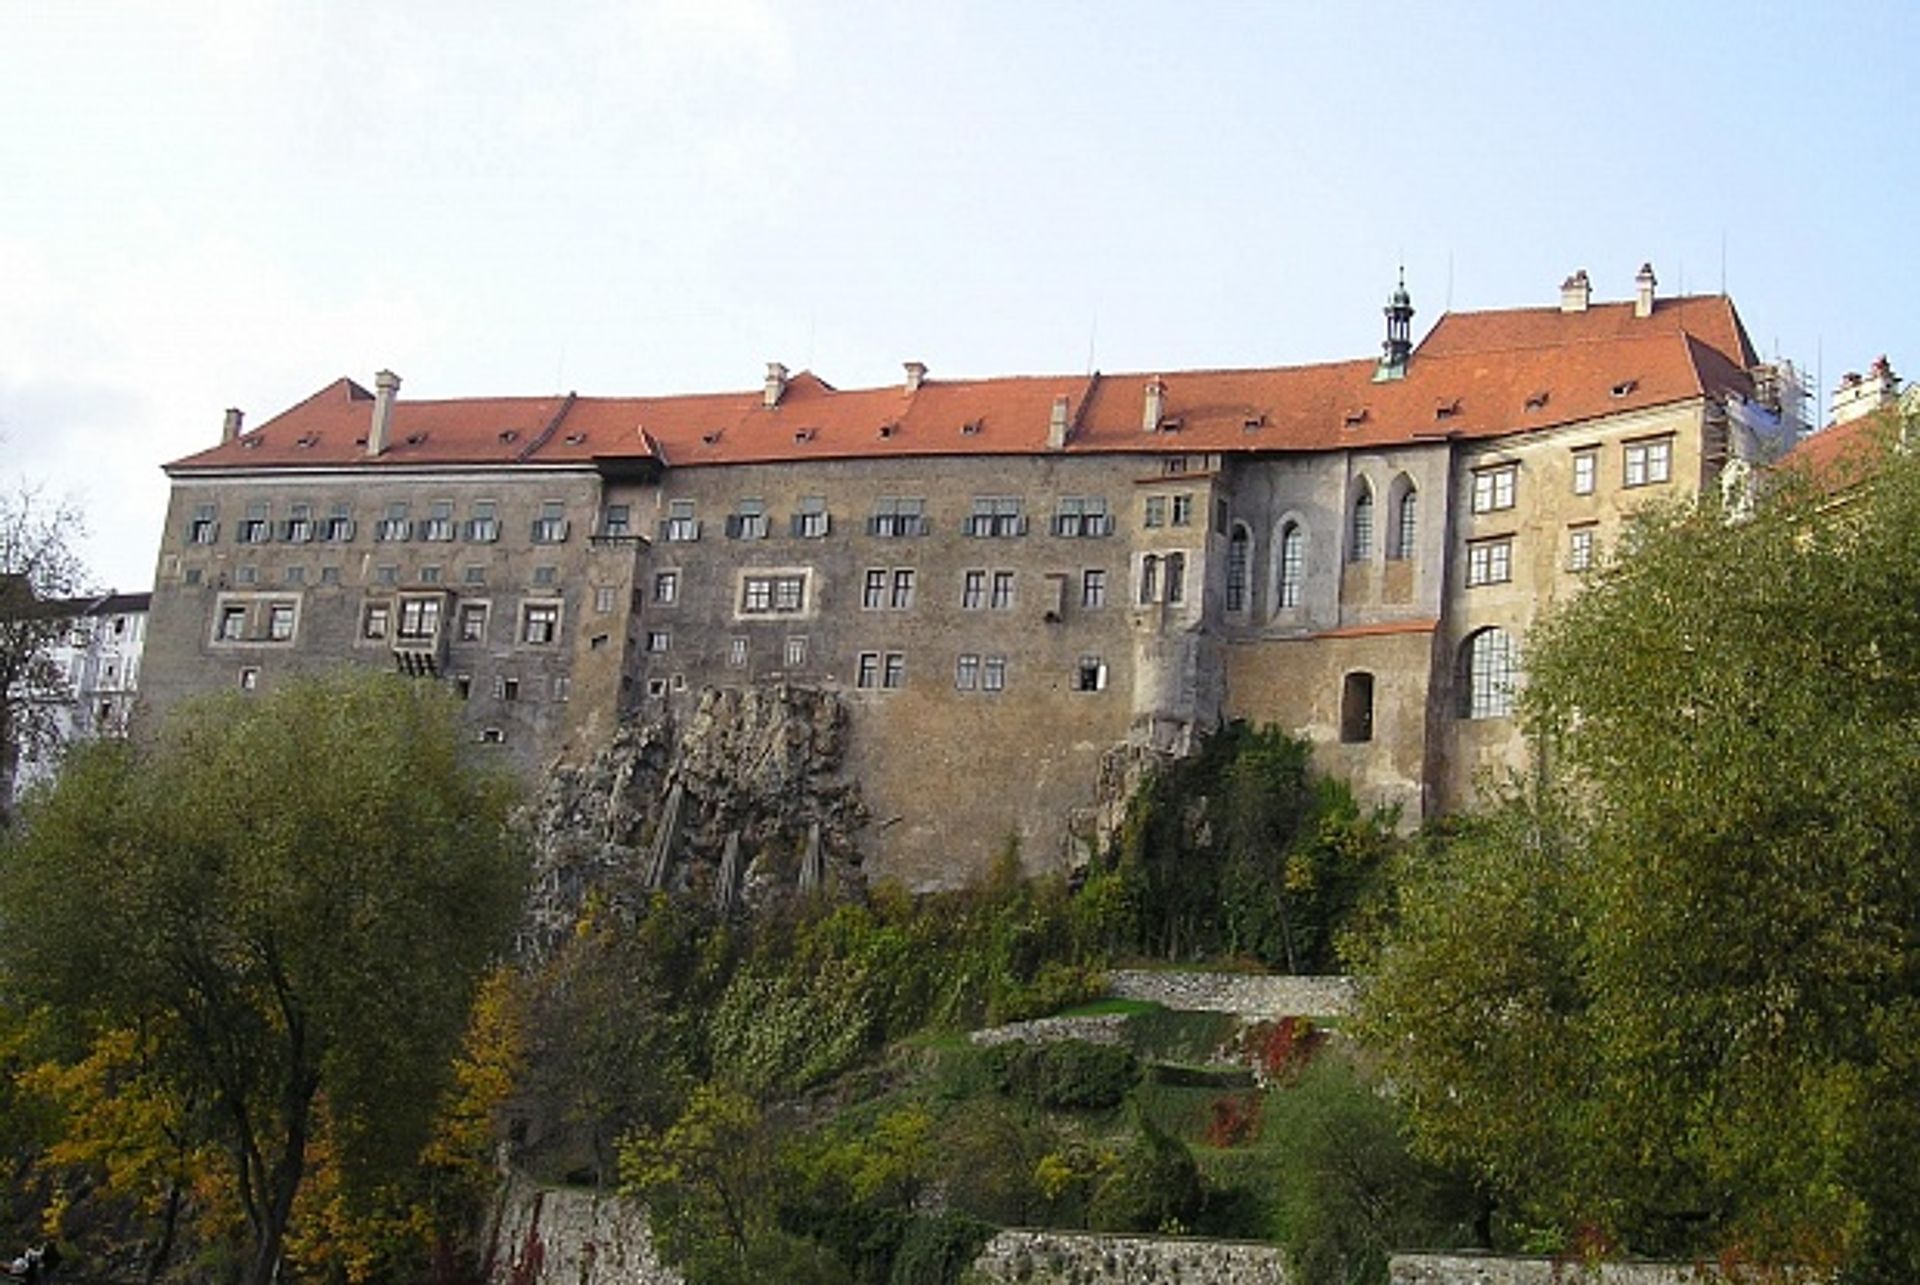 The Pezold family's long-running restitution battle includes the castle in Cesky Krumlov Wiki Commons